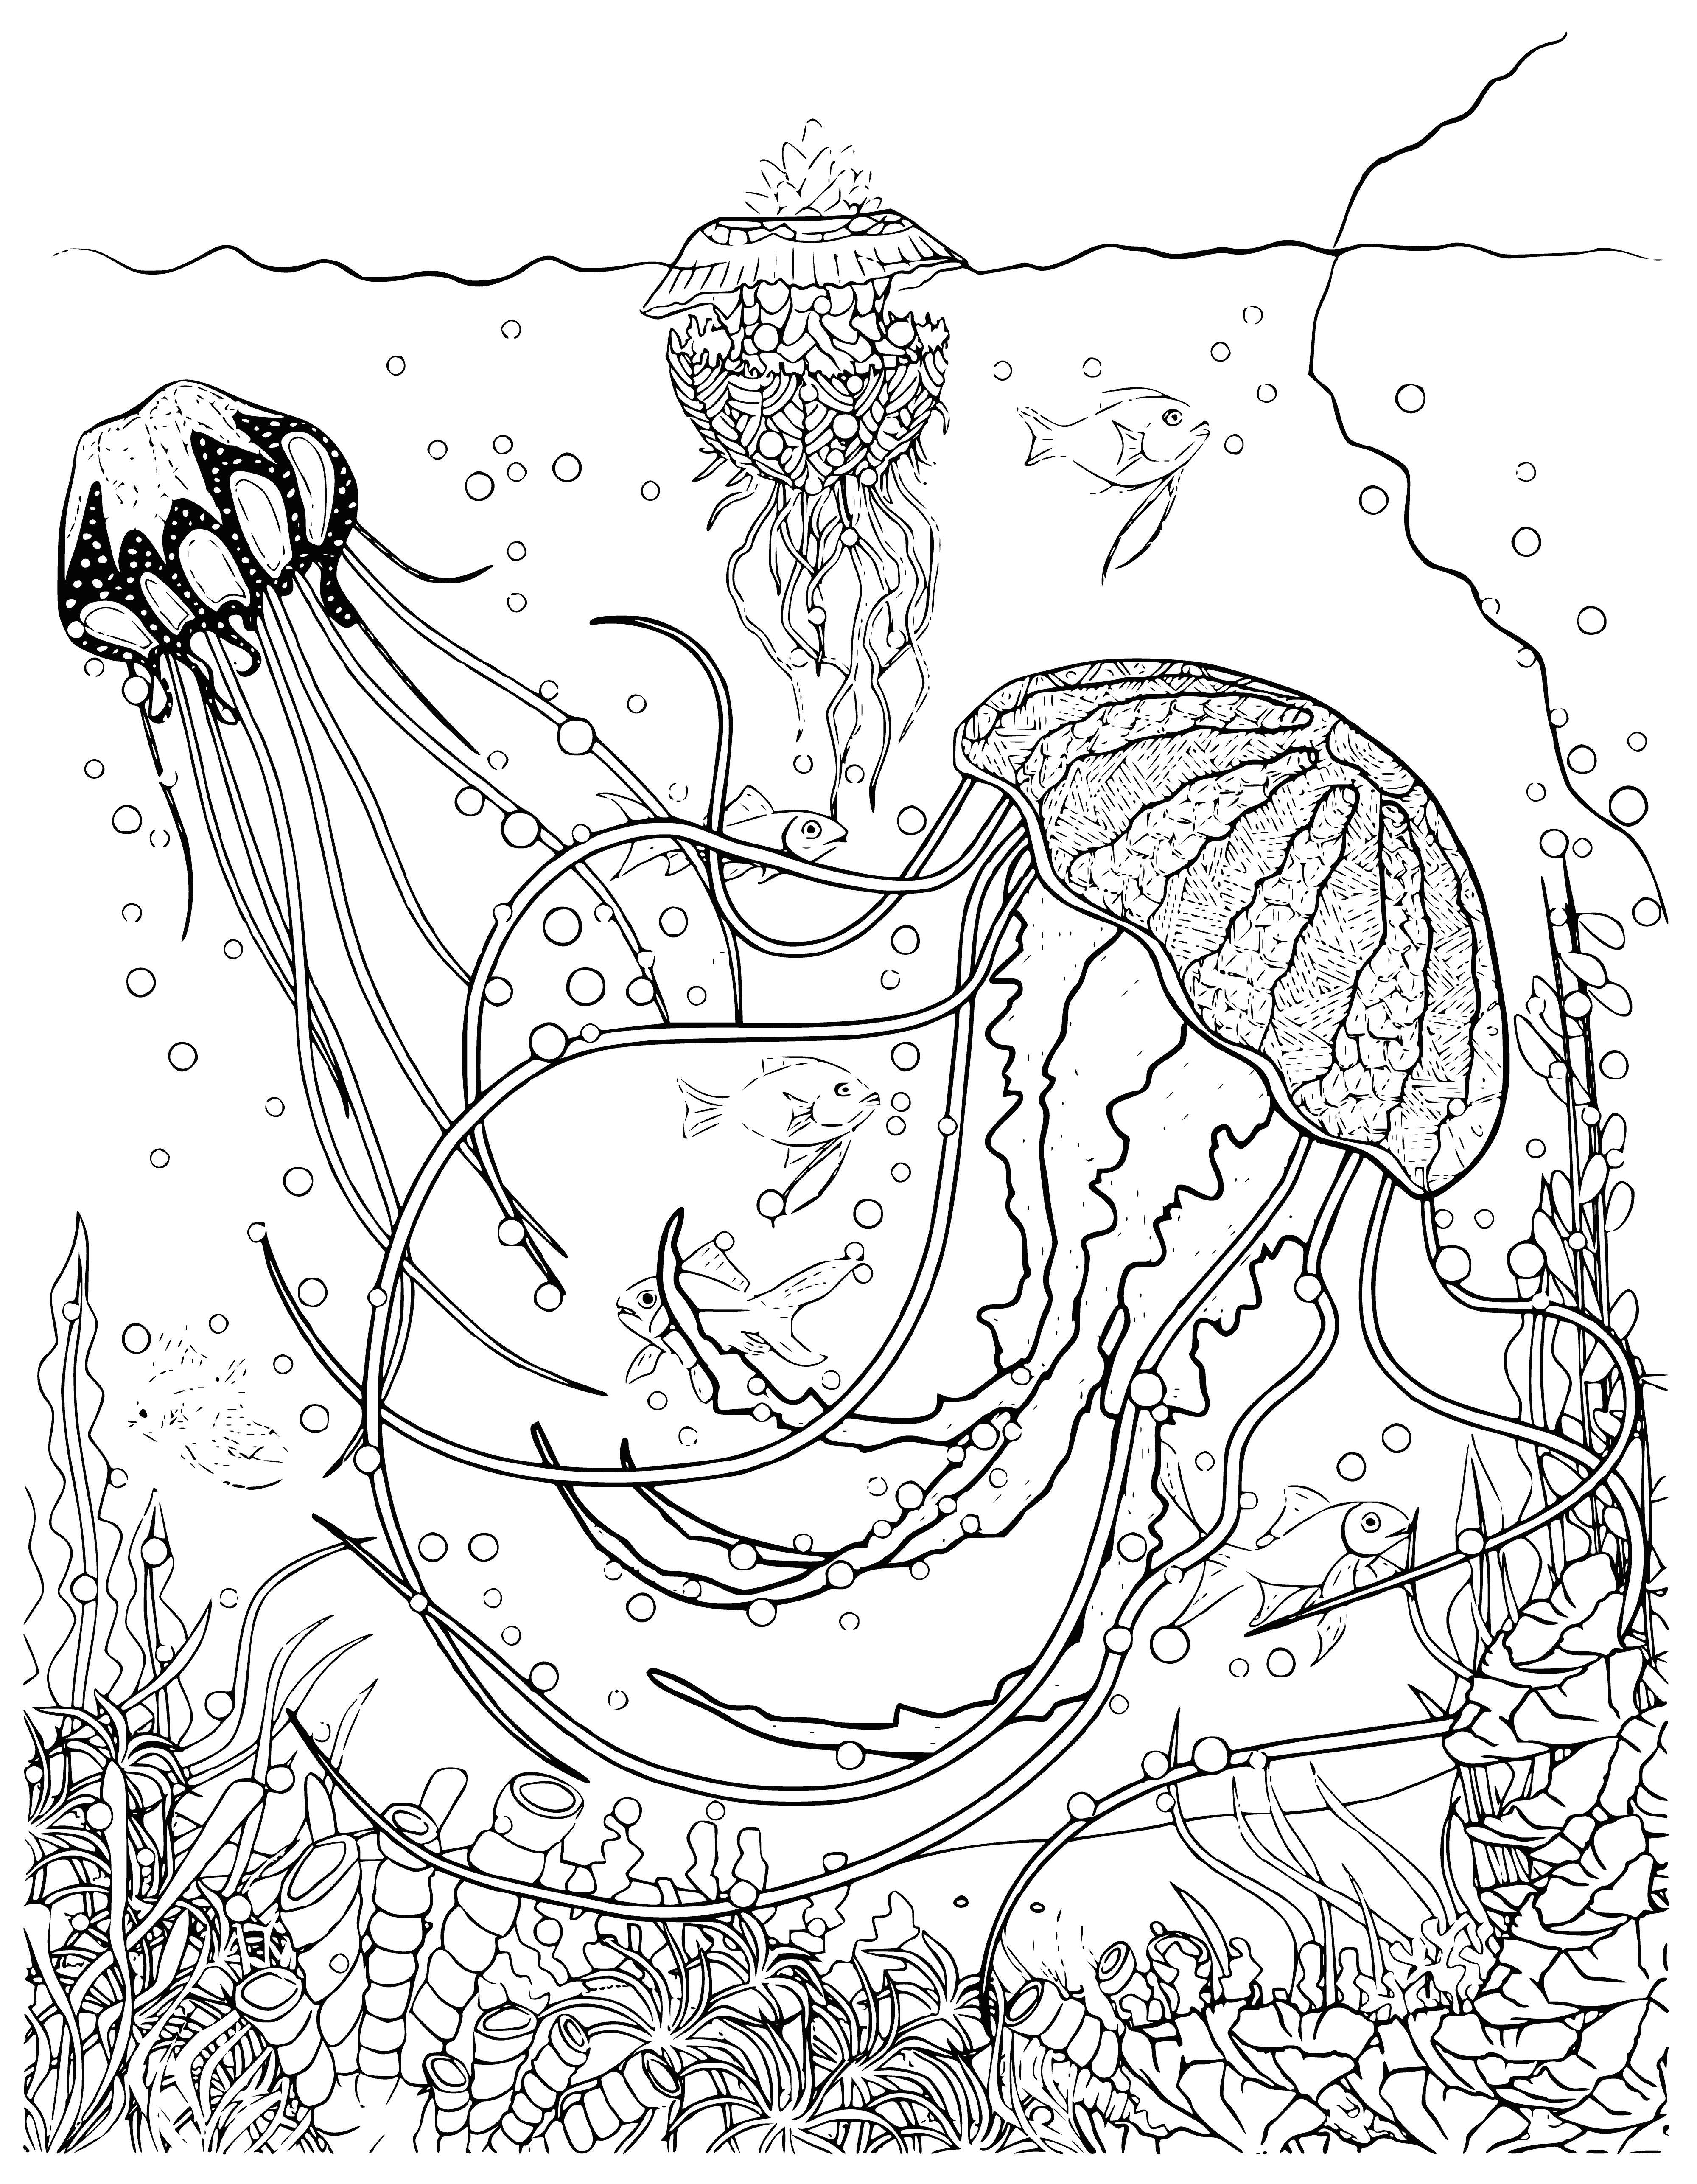 Jellyfish in the sea coloring page